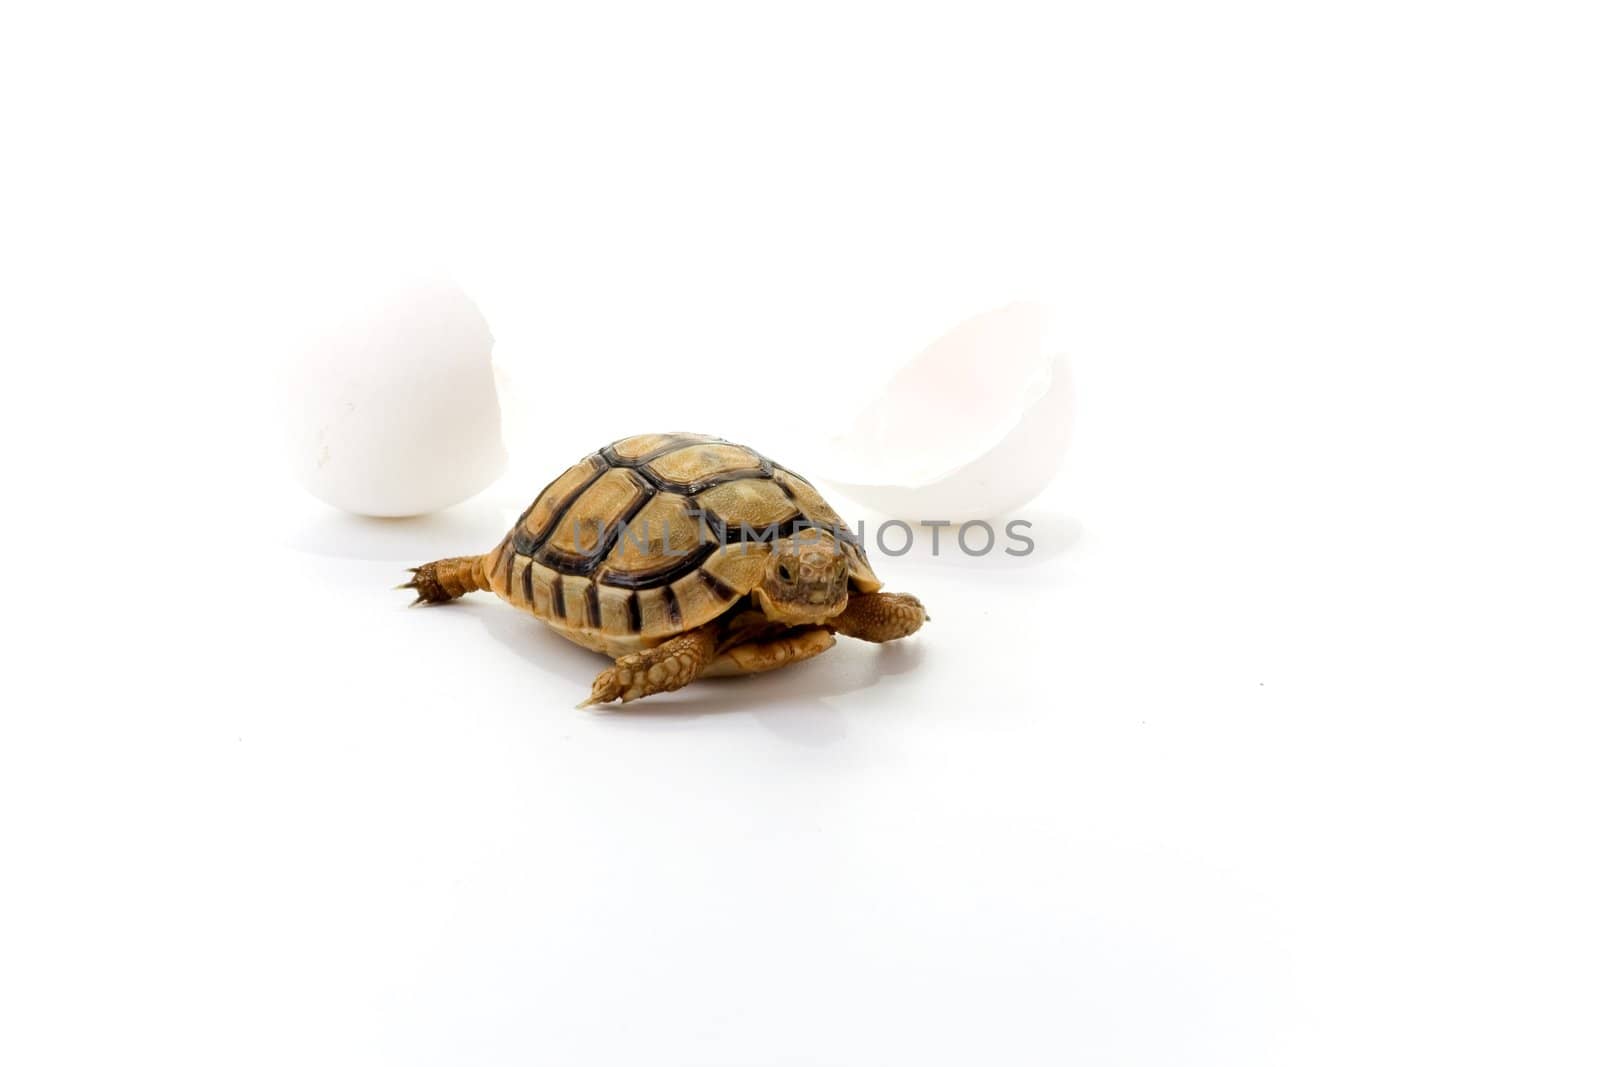 Closeup of a small steppe tortoise with shell eggs from which it hatched on a white background